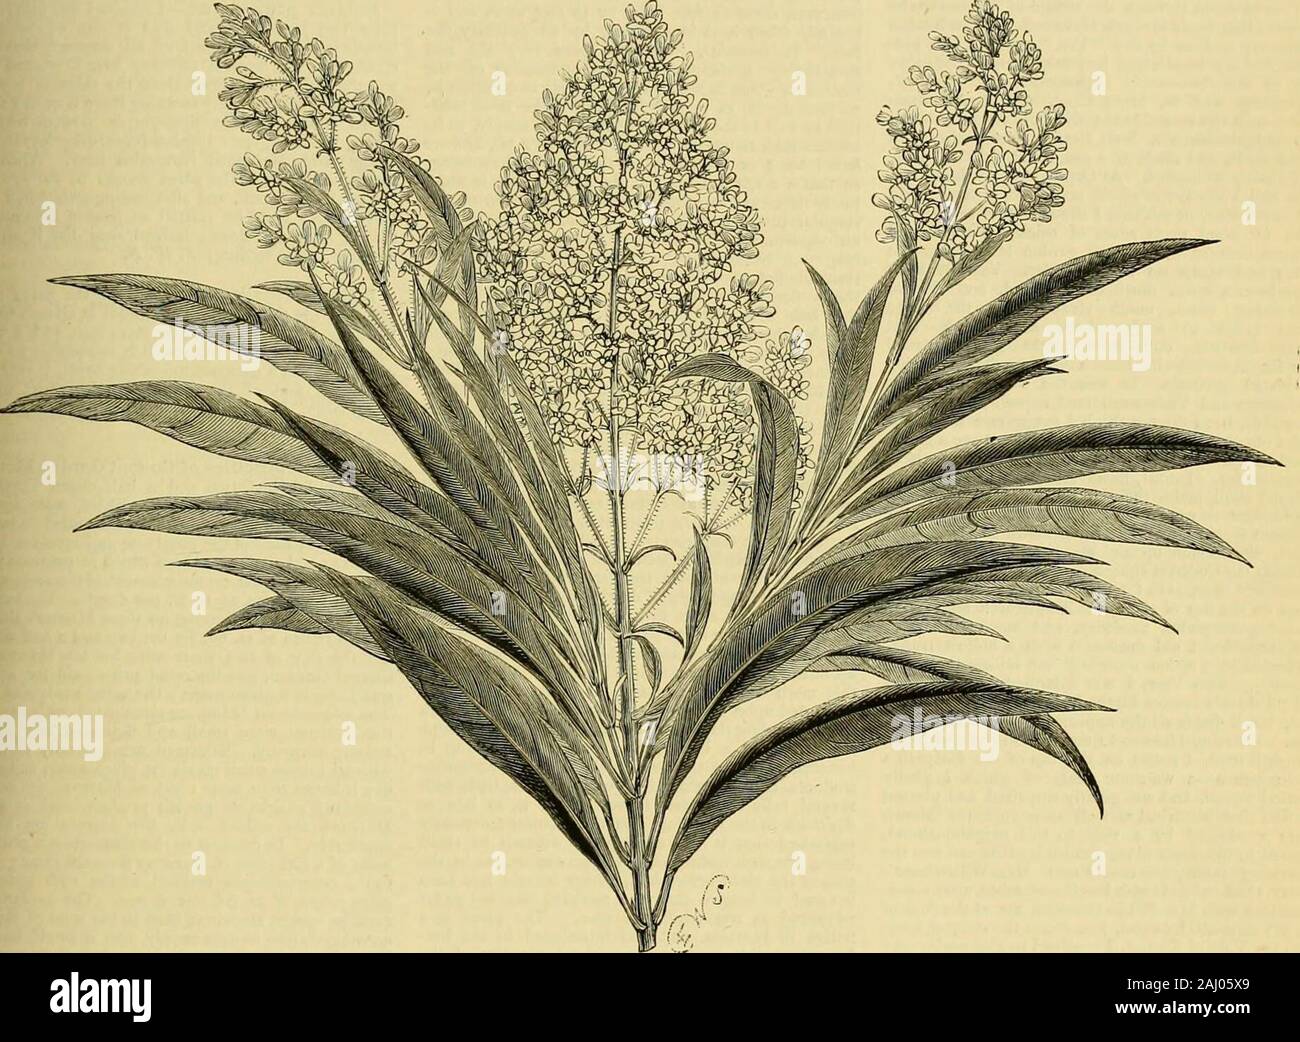 The Gardeners' chronicle : a weekly illustrated journal of horticulture and allied subjects . ora.t. 1035, f. I and 2, d, b.—; dwarf form, with cream-coloured flowers striped with purple ; leaves linear.Turkestan. Clematis .TiriiusiFOLiA, Turczan., Bo/. Jfa^.,t. 6542.—. hardy climber, with finely cut leaves andlong-stalked tubular bell-shaped flowers, each i—ij younger leaves almost entirely pale crimson. A seed-ling between terminalis and regina. Raised by Mr,Bause for the General Horticultural Company (JohnWills). Erantiiemum nigrum, IUhsI, HorticoU, t. 404.—A stove shrub, with oblong lan Stock Photo